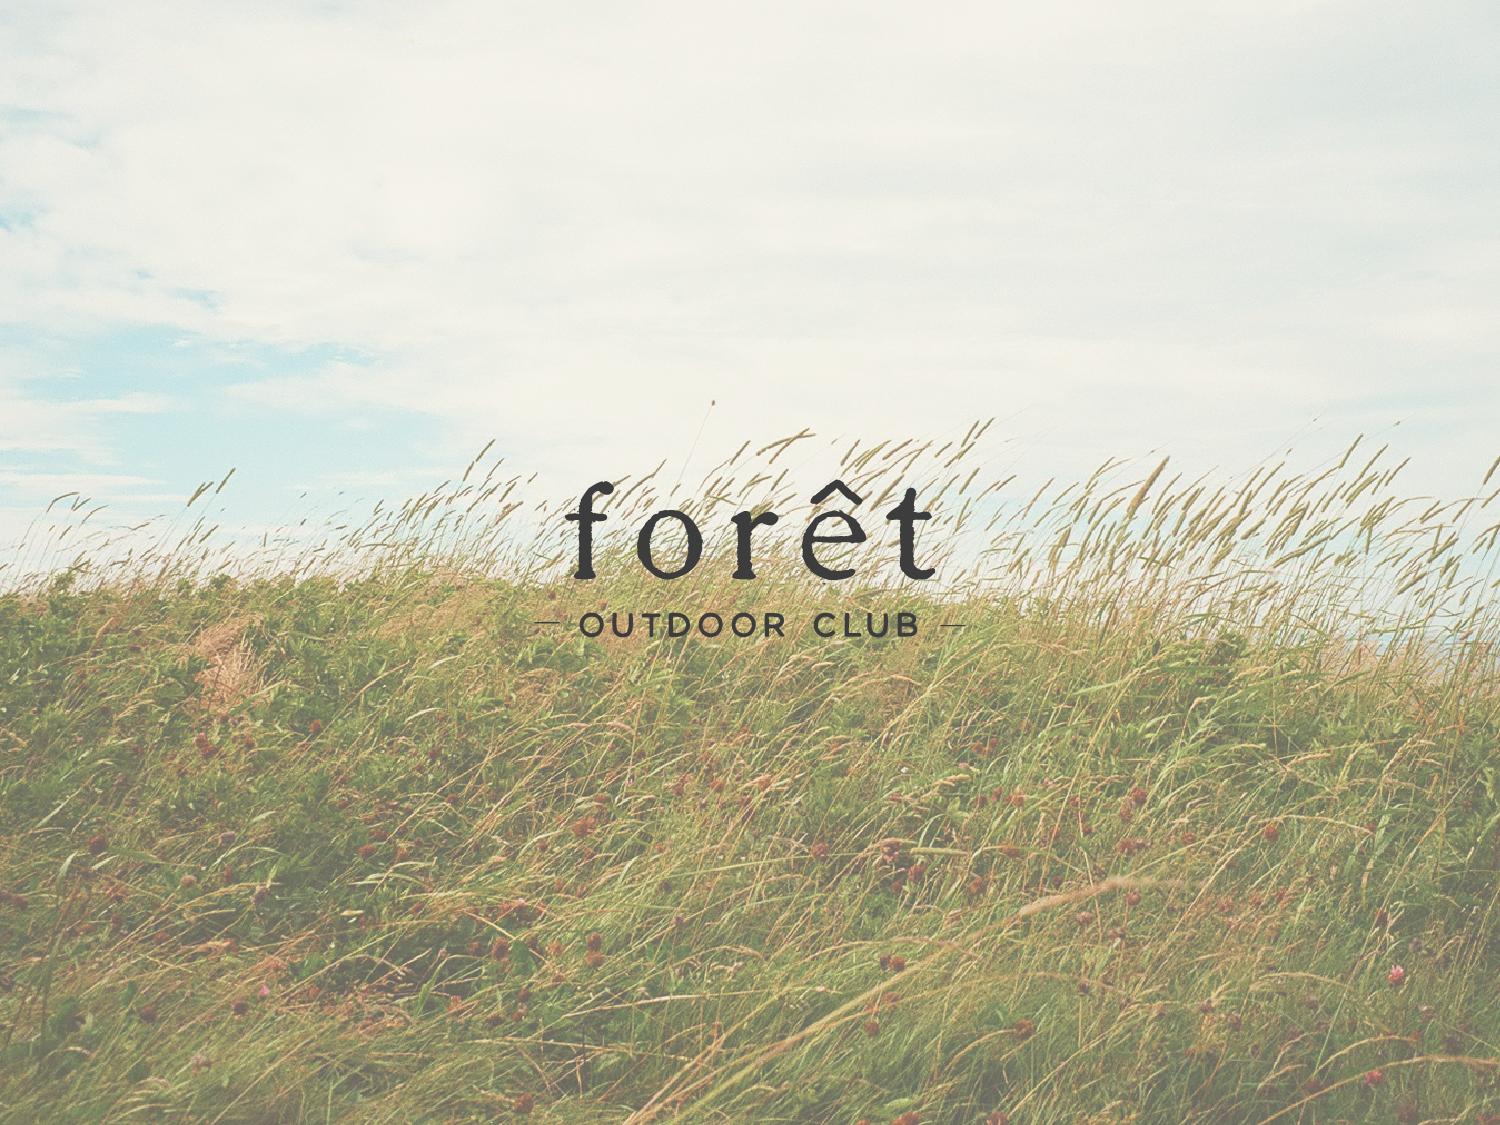 The forêt logo overlaid on a film photo of a grassy field with a blue sky.